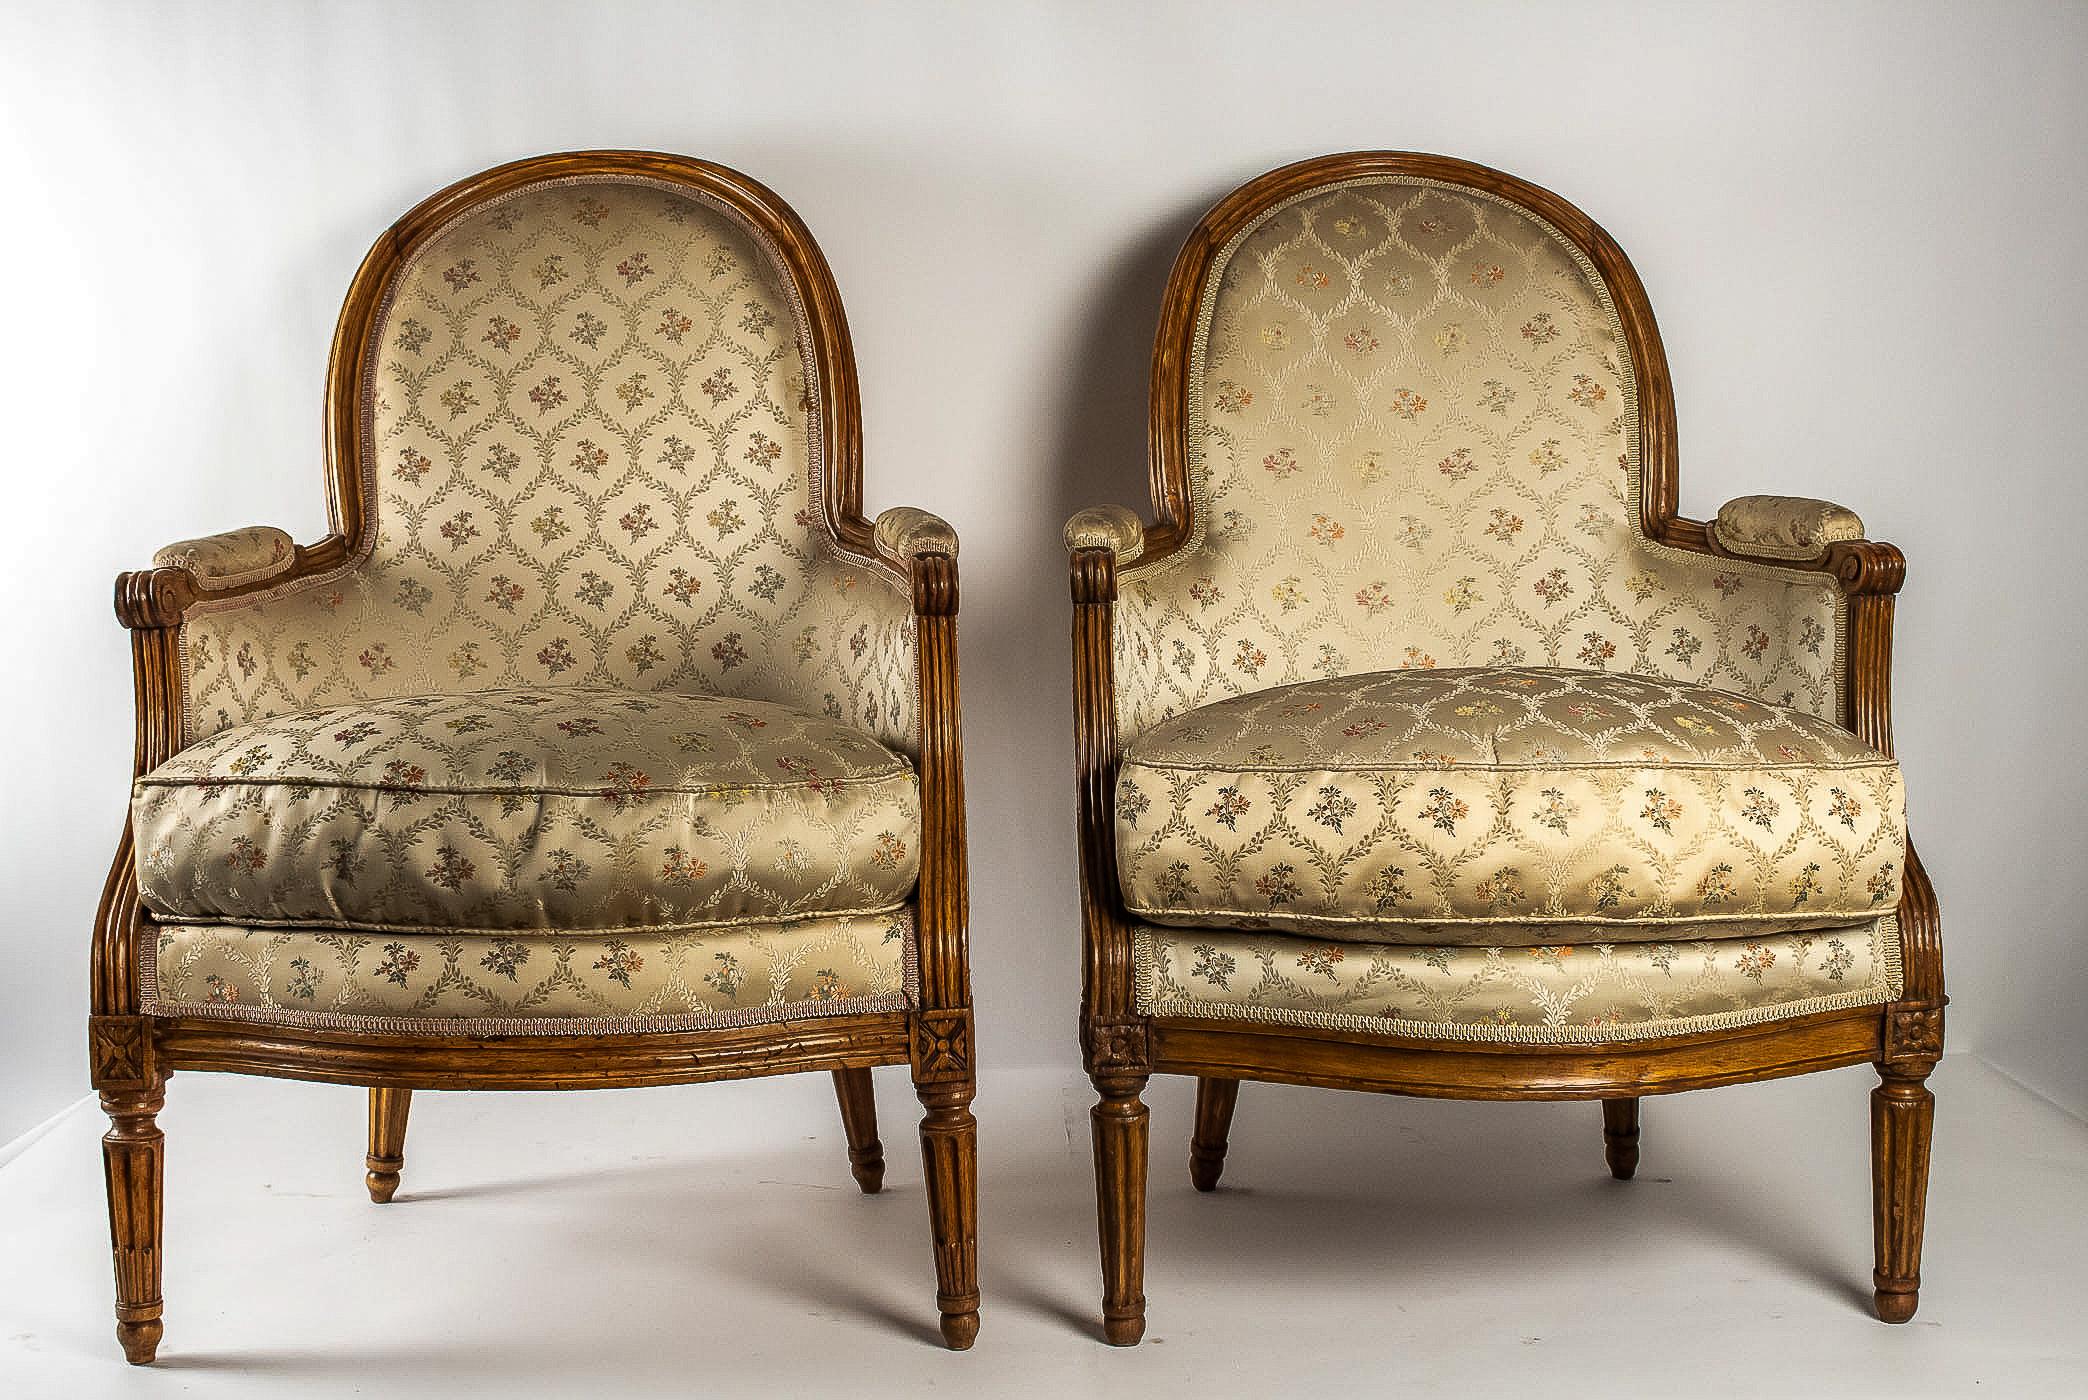 French Louis XVI Period set of two Bergeres, circa 1780

A gorgeous French Louis XVI period set of two Bergeres in natural beech-wood in a neoclassical detailing and form.

Beautiful French work, late-18th century, Louis XVI period set of two